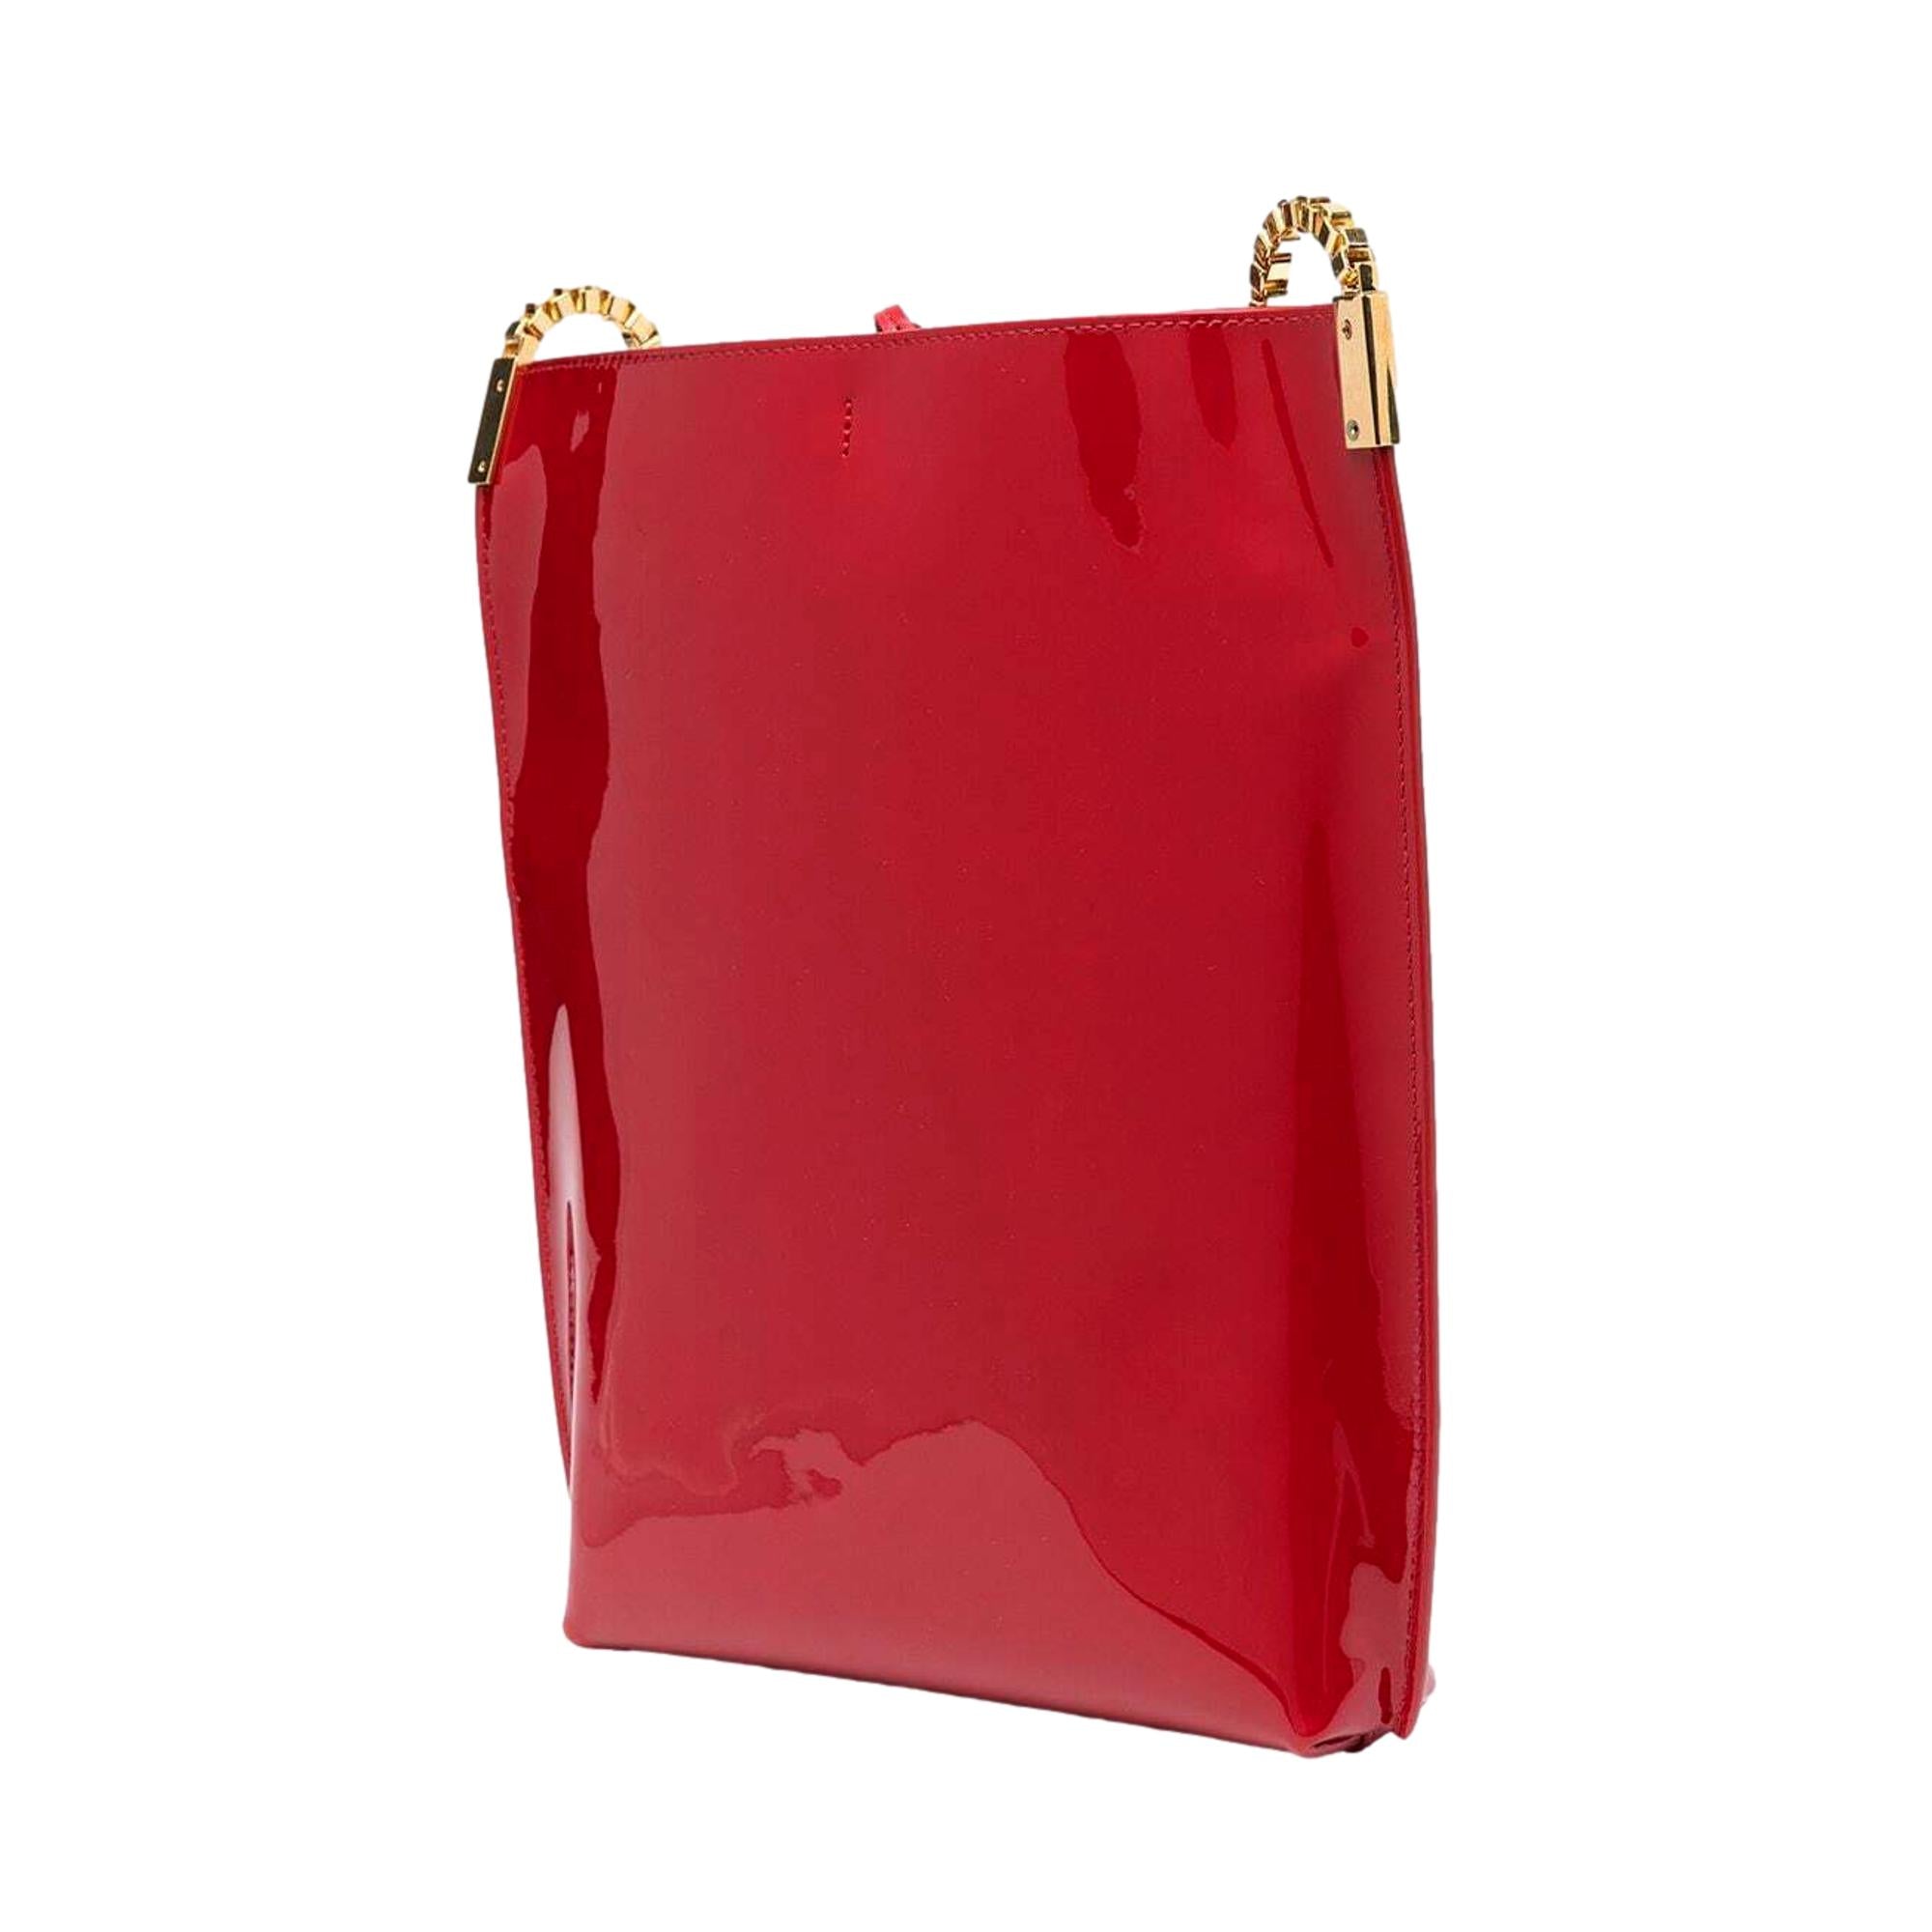 Saint Laurent Suzanne Red Patent Leather Small Chain Hobo Bag